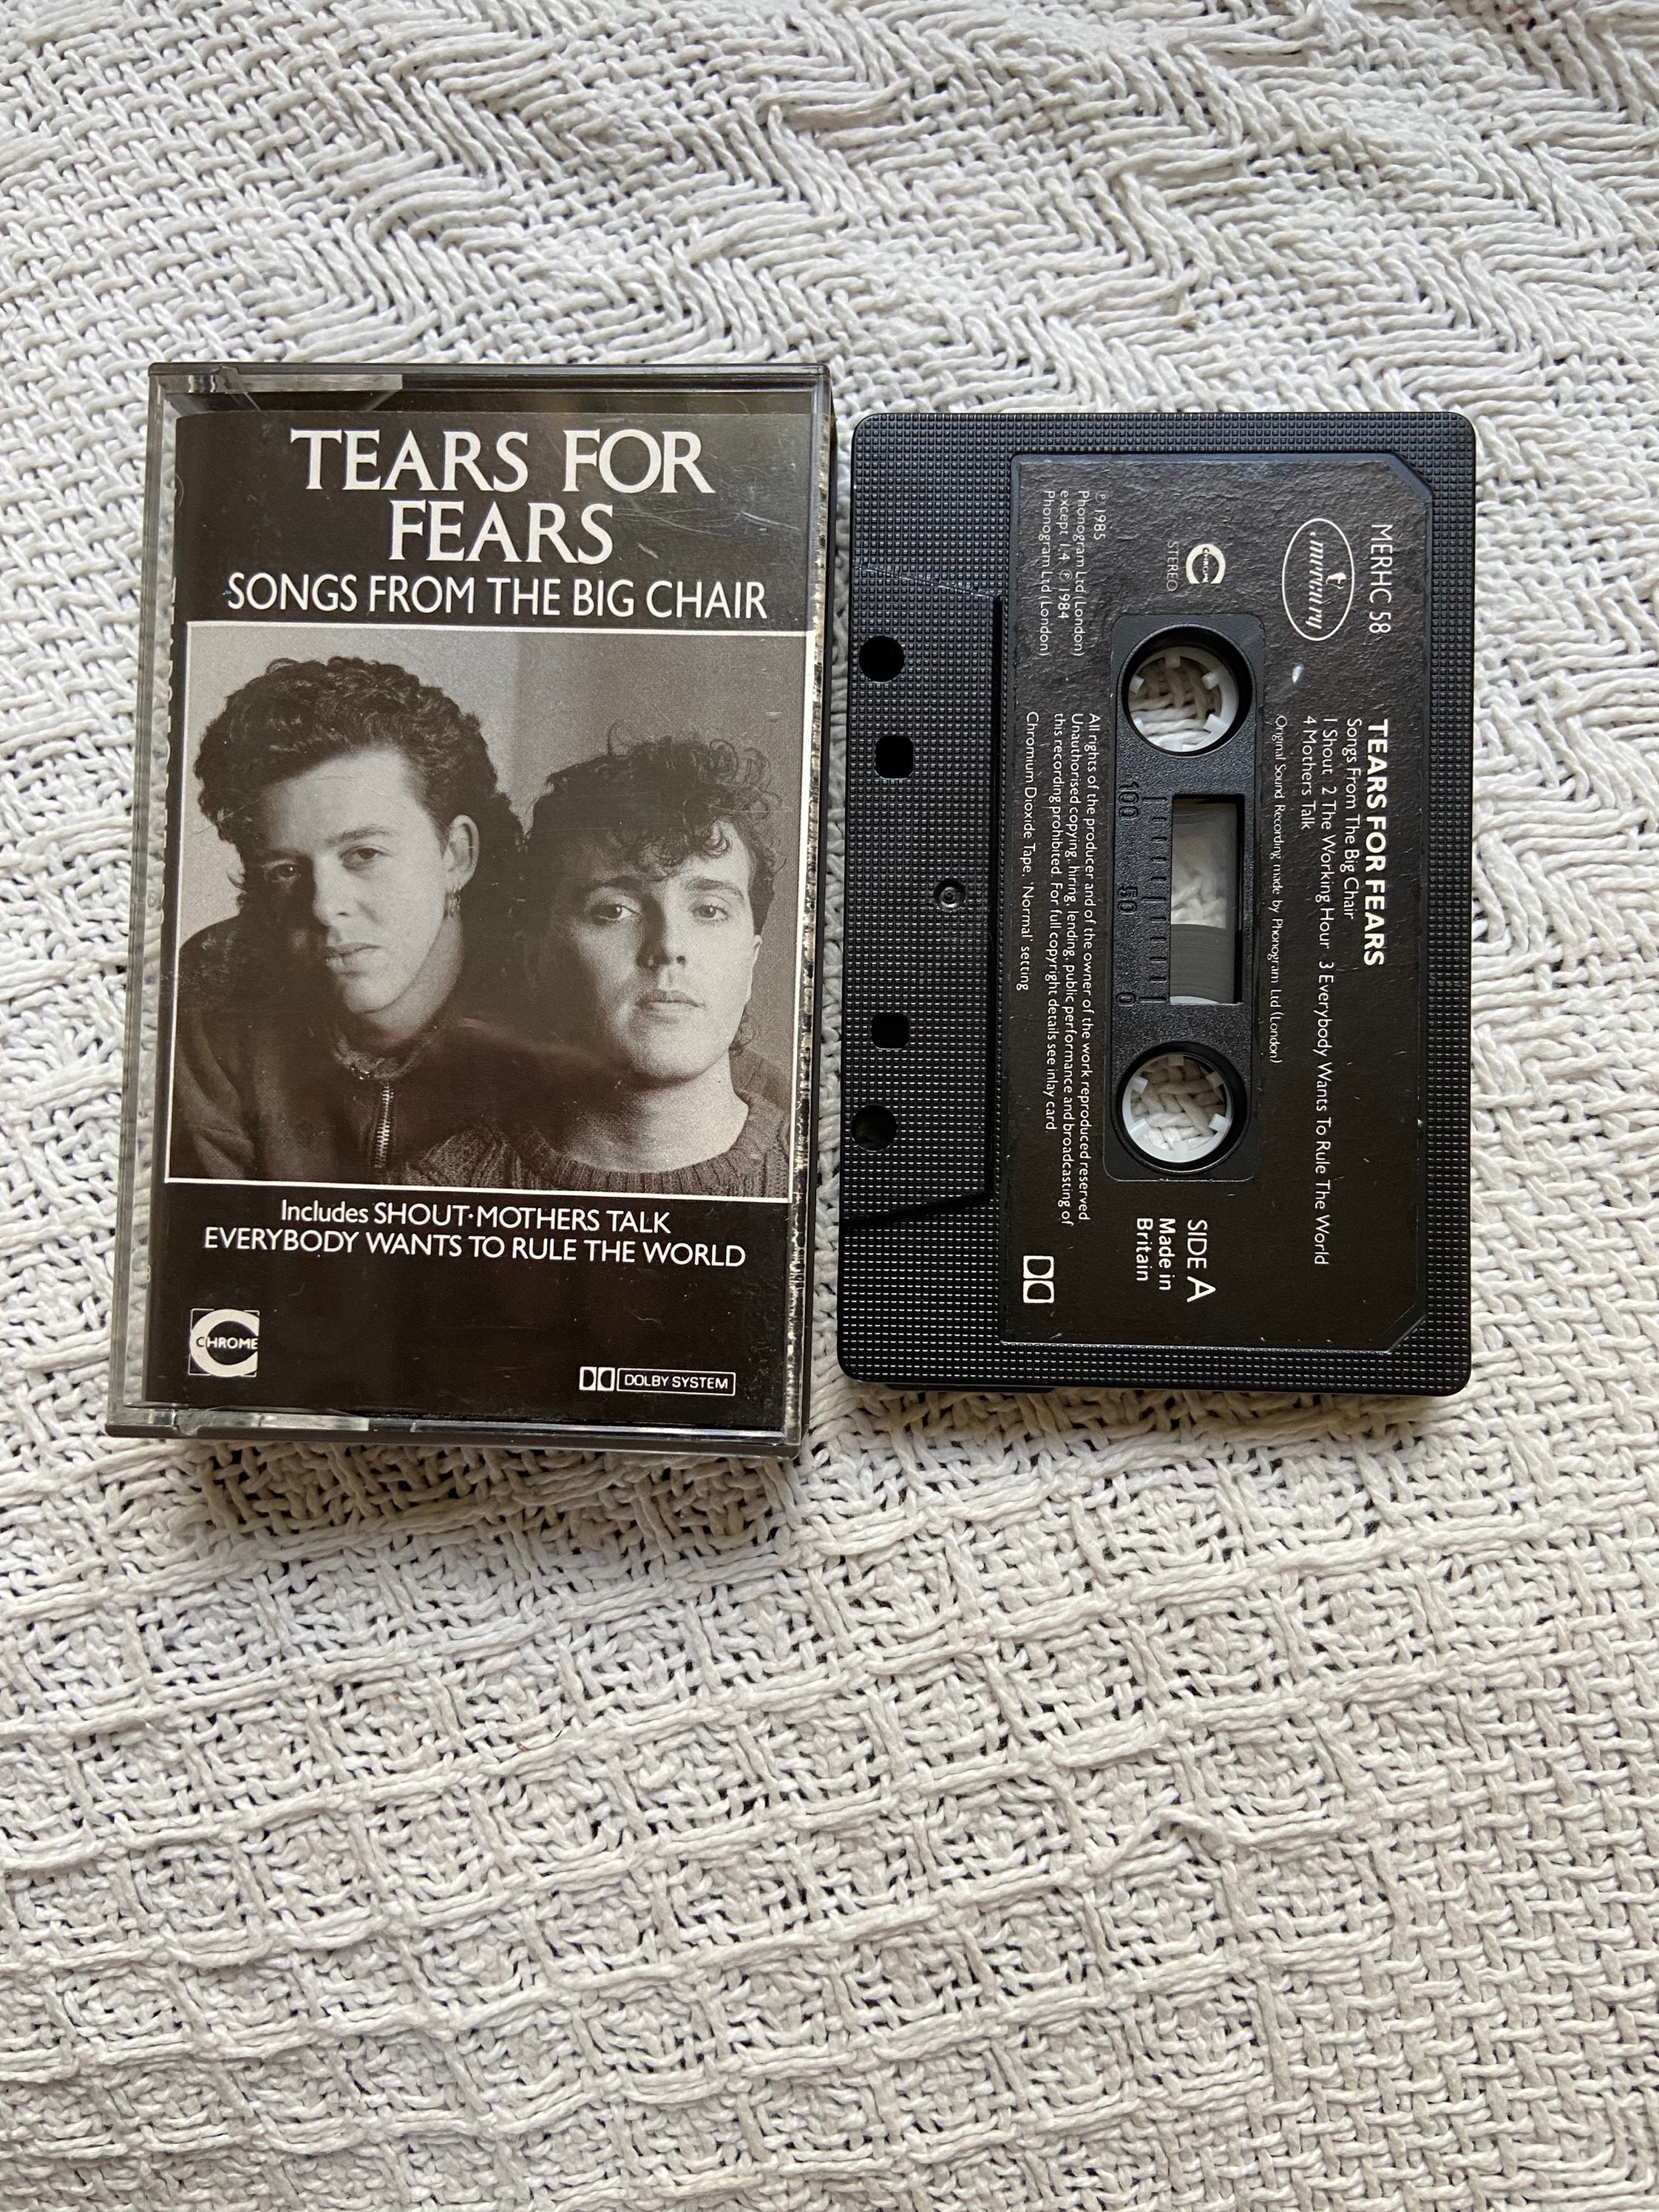 Vintage Tears for Fears Songs from the Big Chair Vinyl Record LP 1985 Album  12 Everybody Wants to Rule the World